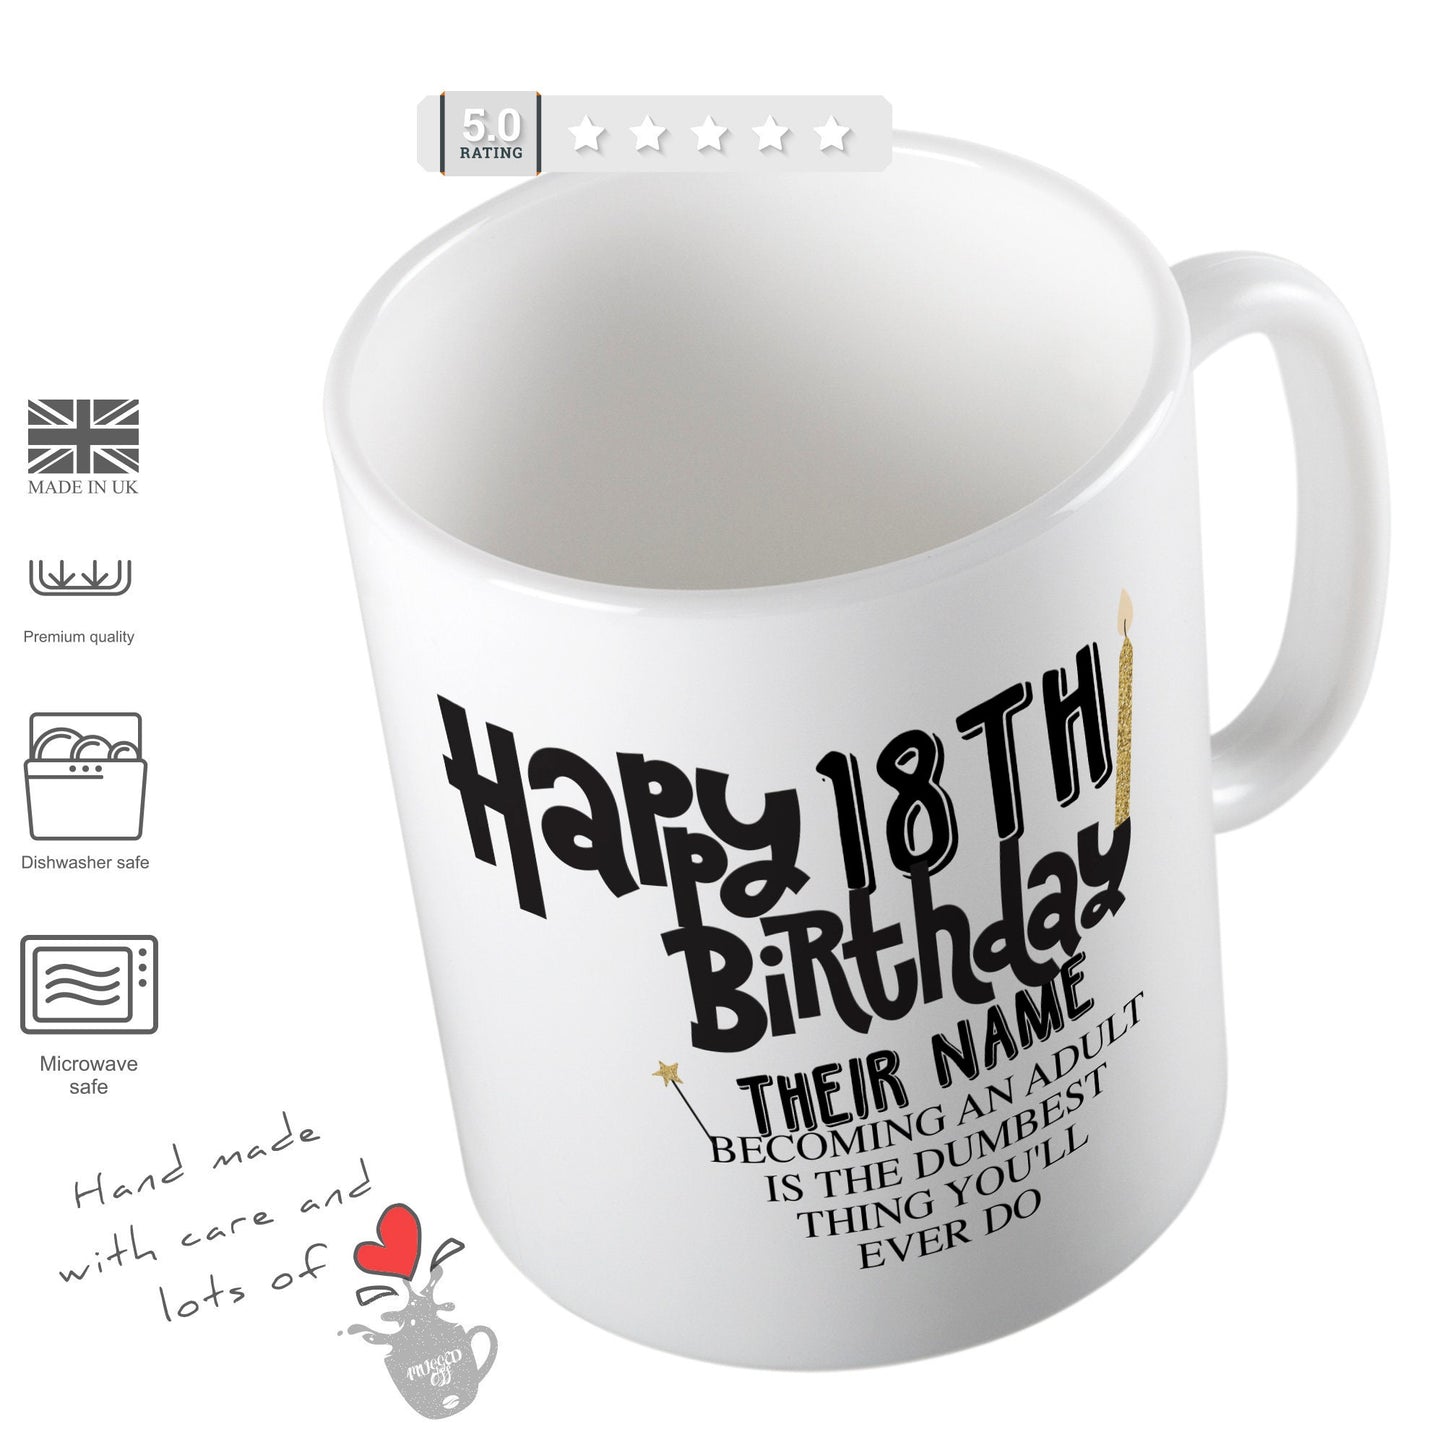 Happy 18 th Birthday Present (Personalised With Their Name) Growing Up Is The Dumbest Thing You'll Ever Do Mug Cup Happy 18th Birthday